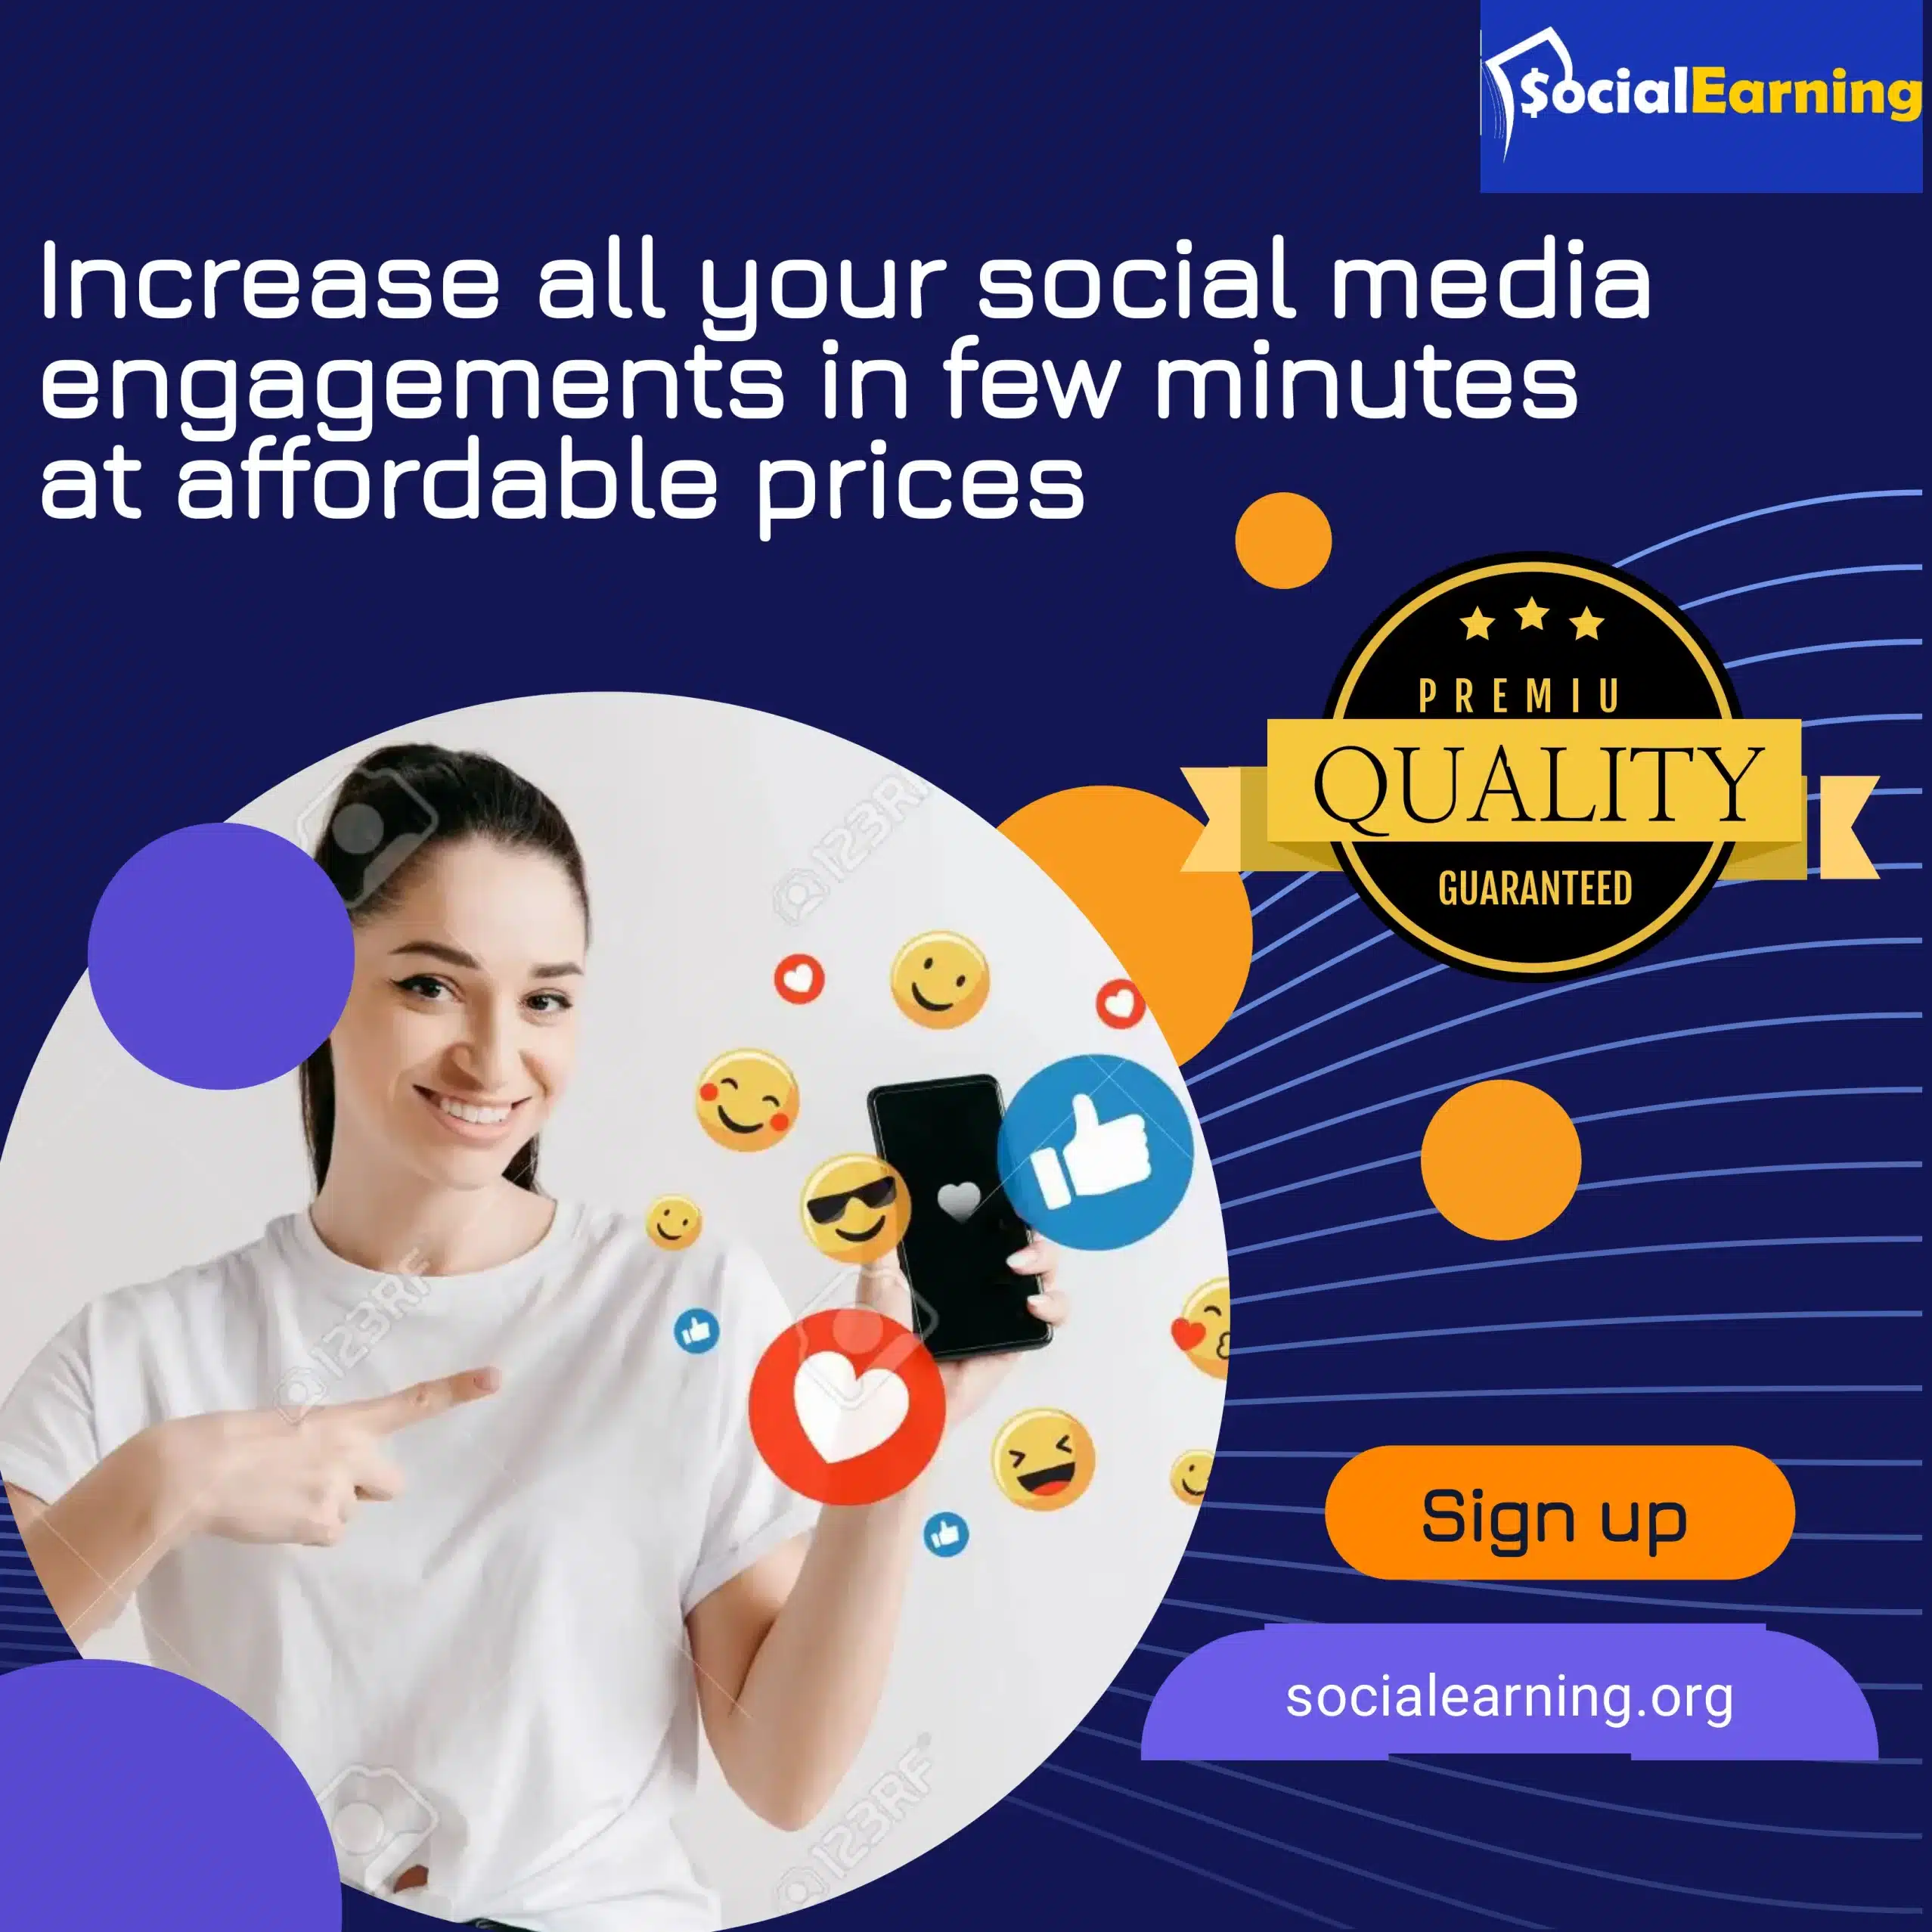 Socialearning Review